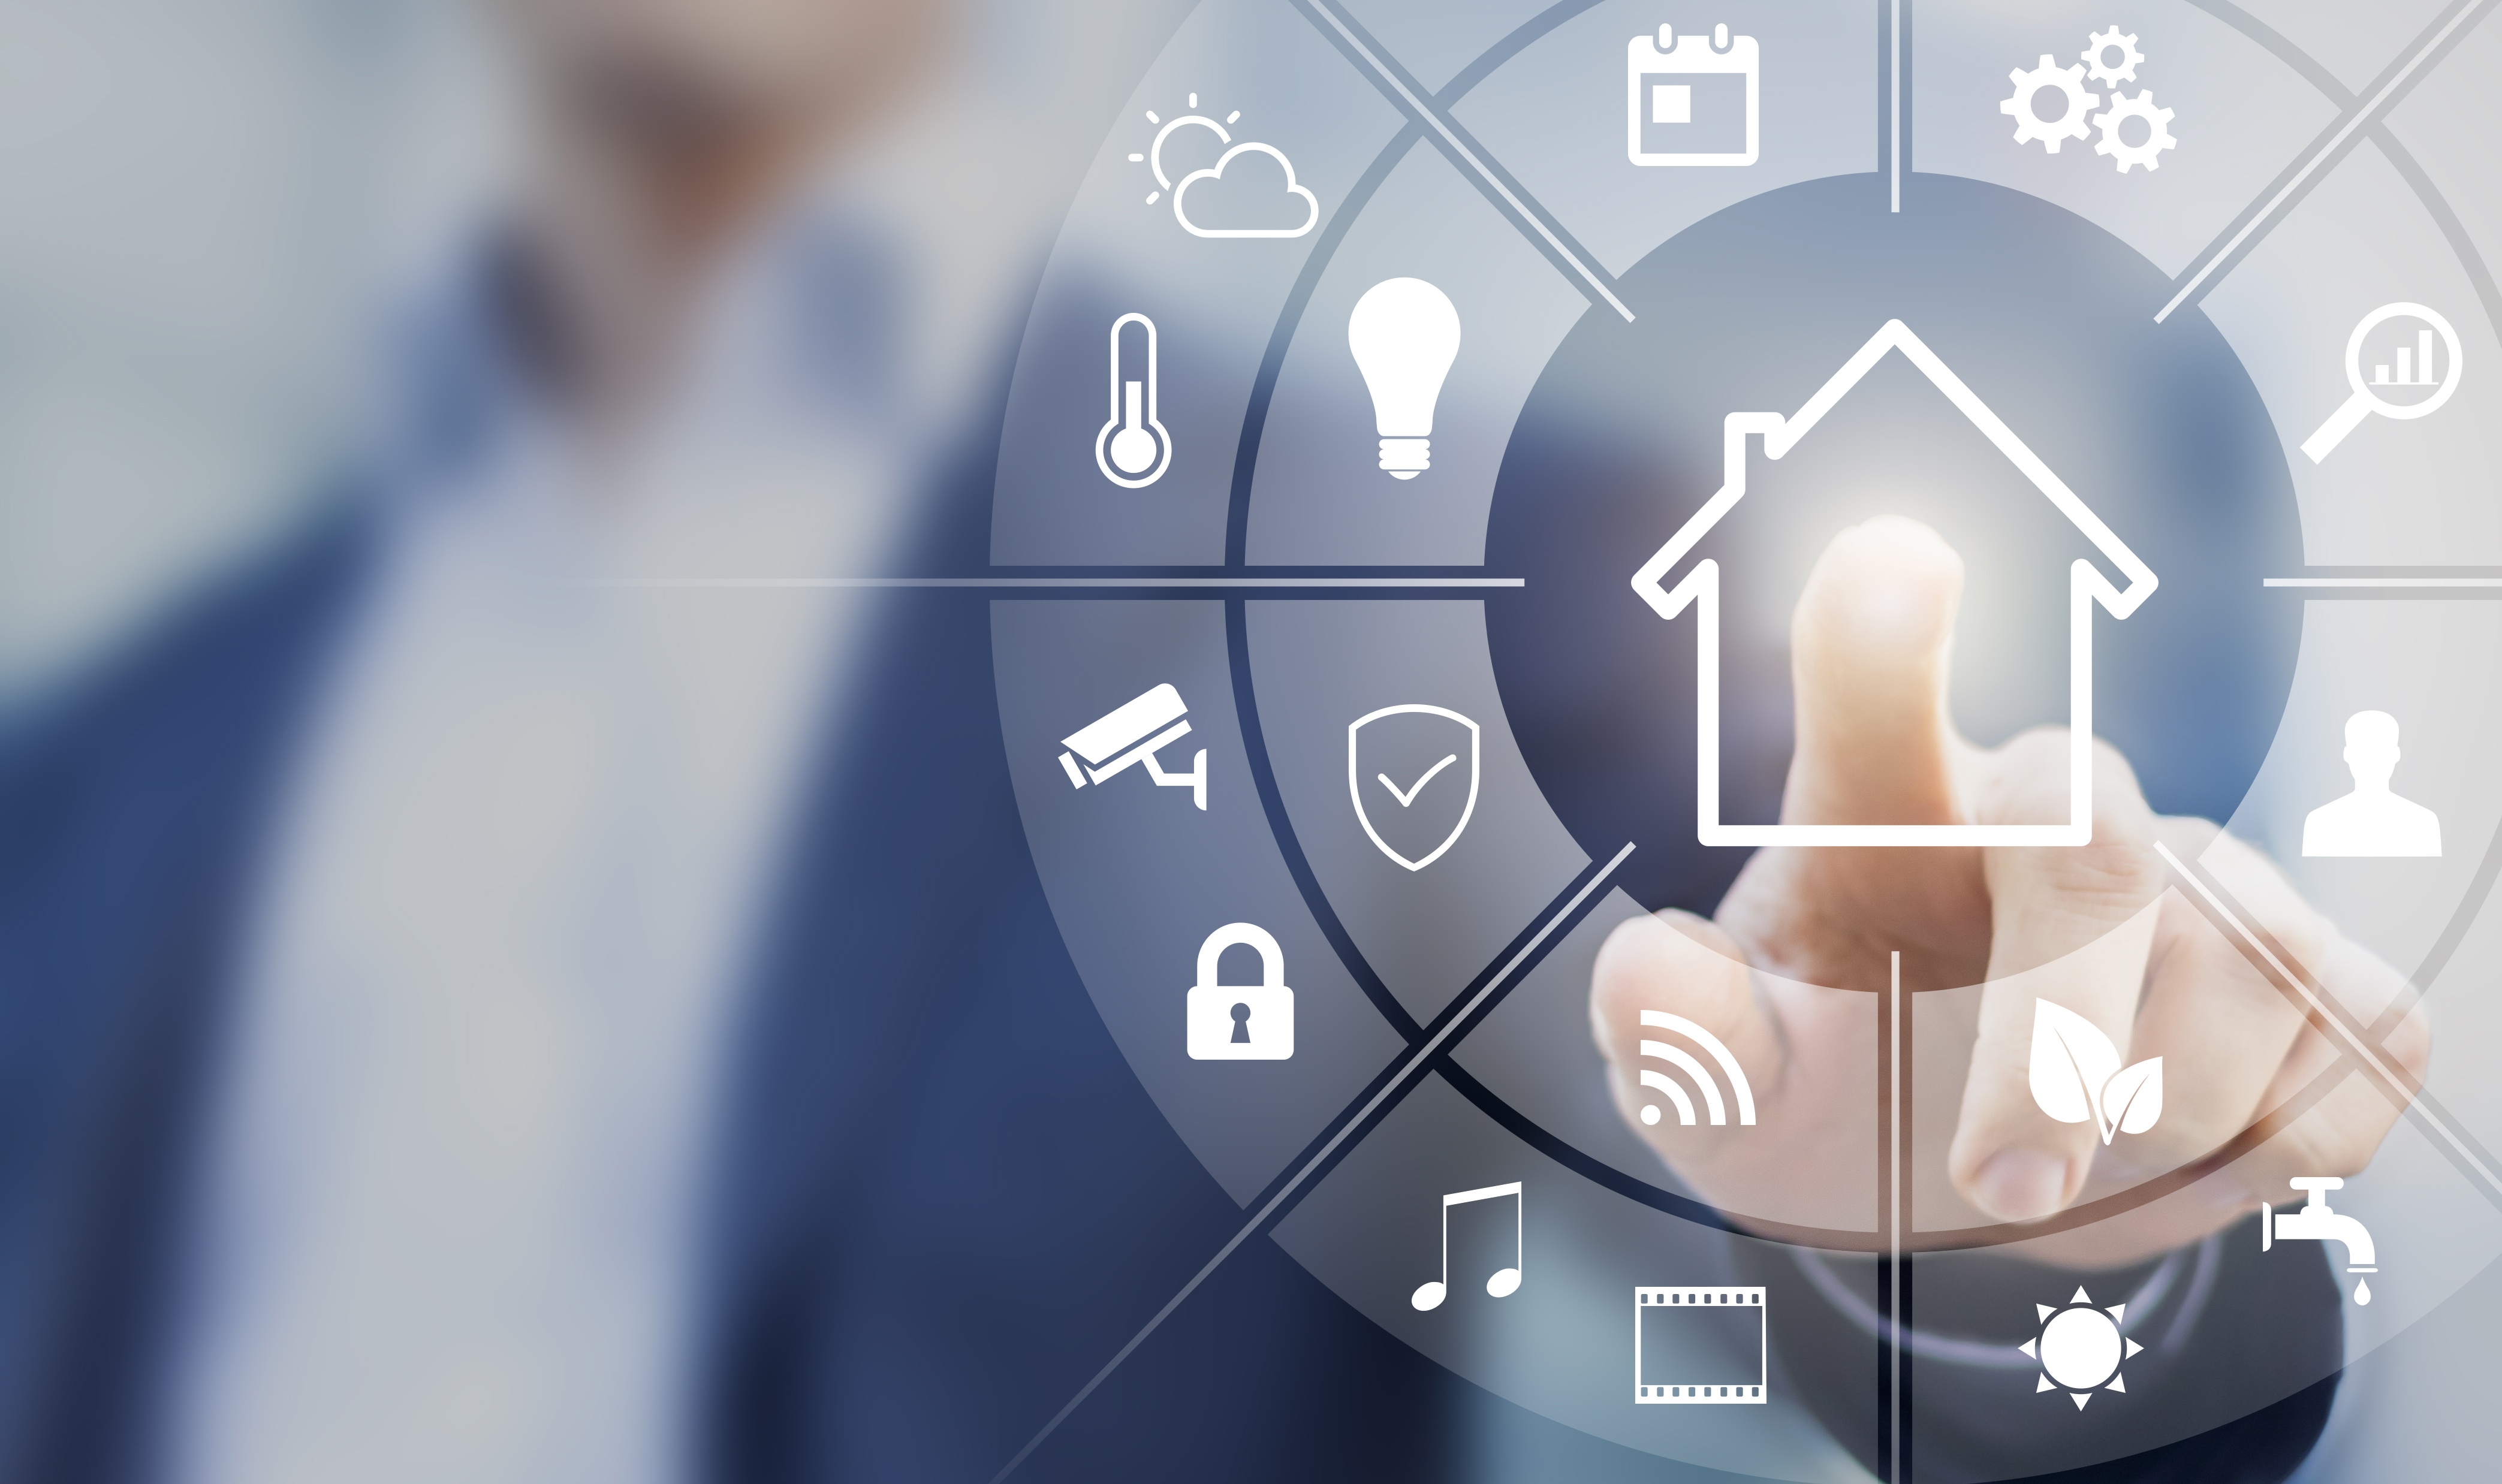 ISPs Have to Protect Smart Homes to Protect Their Business